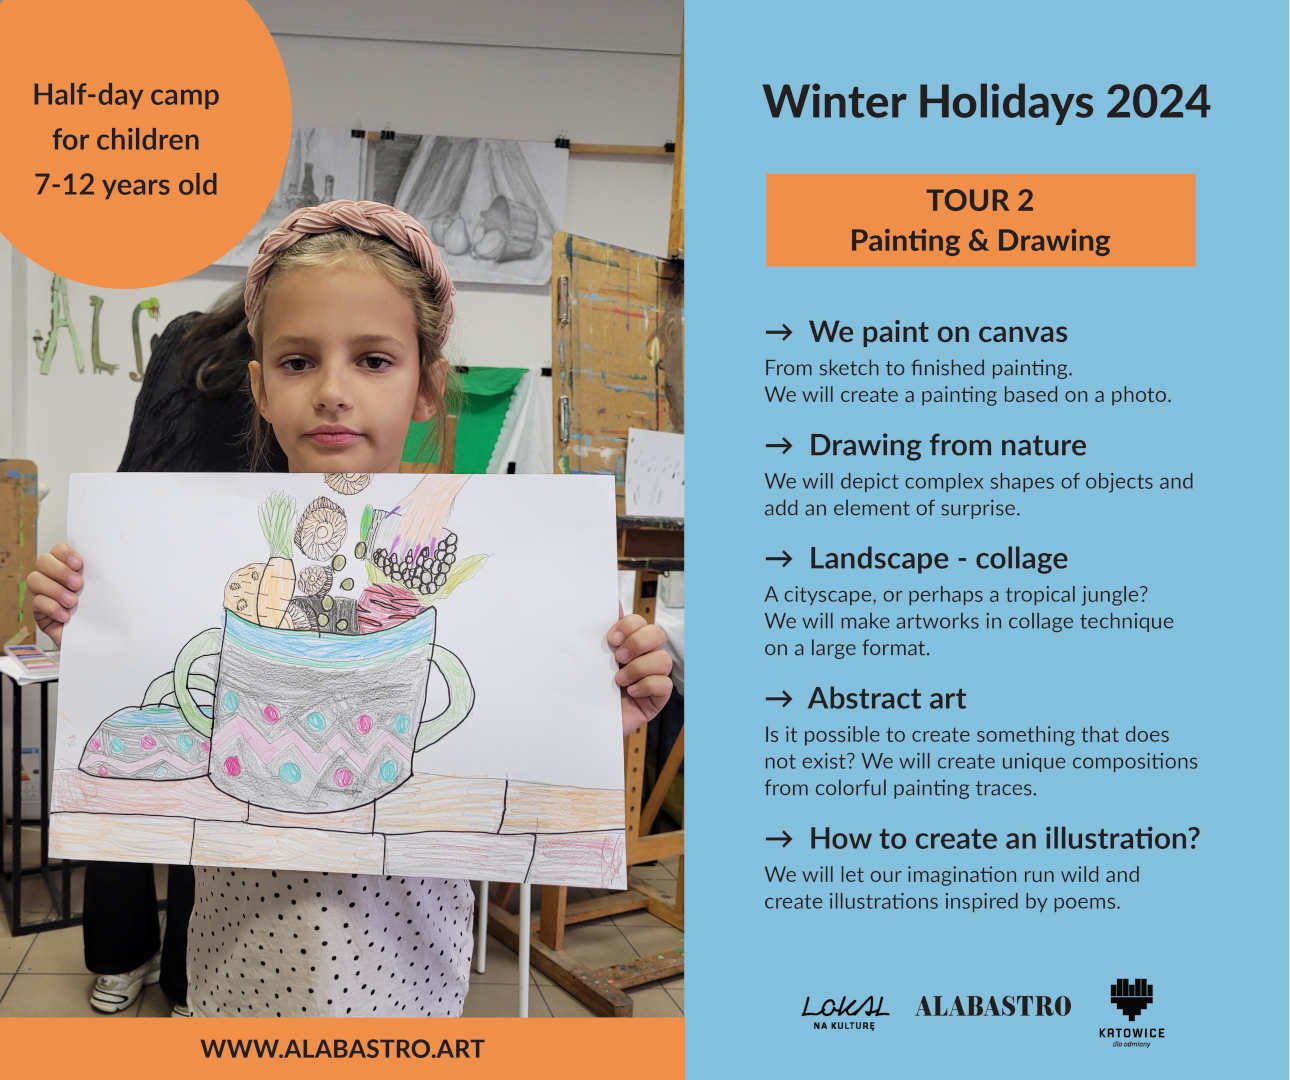 A participant shows her drawing at the 2024 winter holidays.